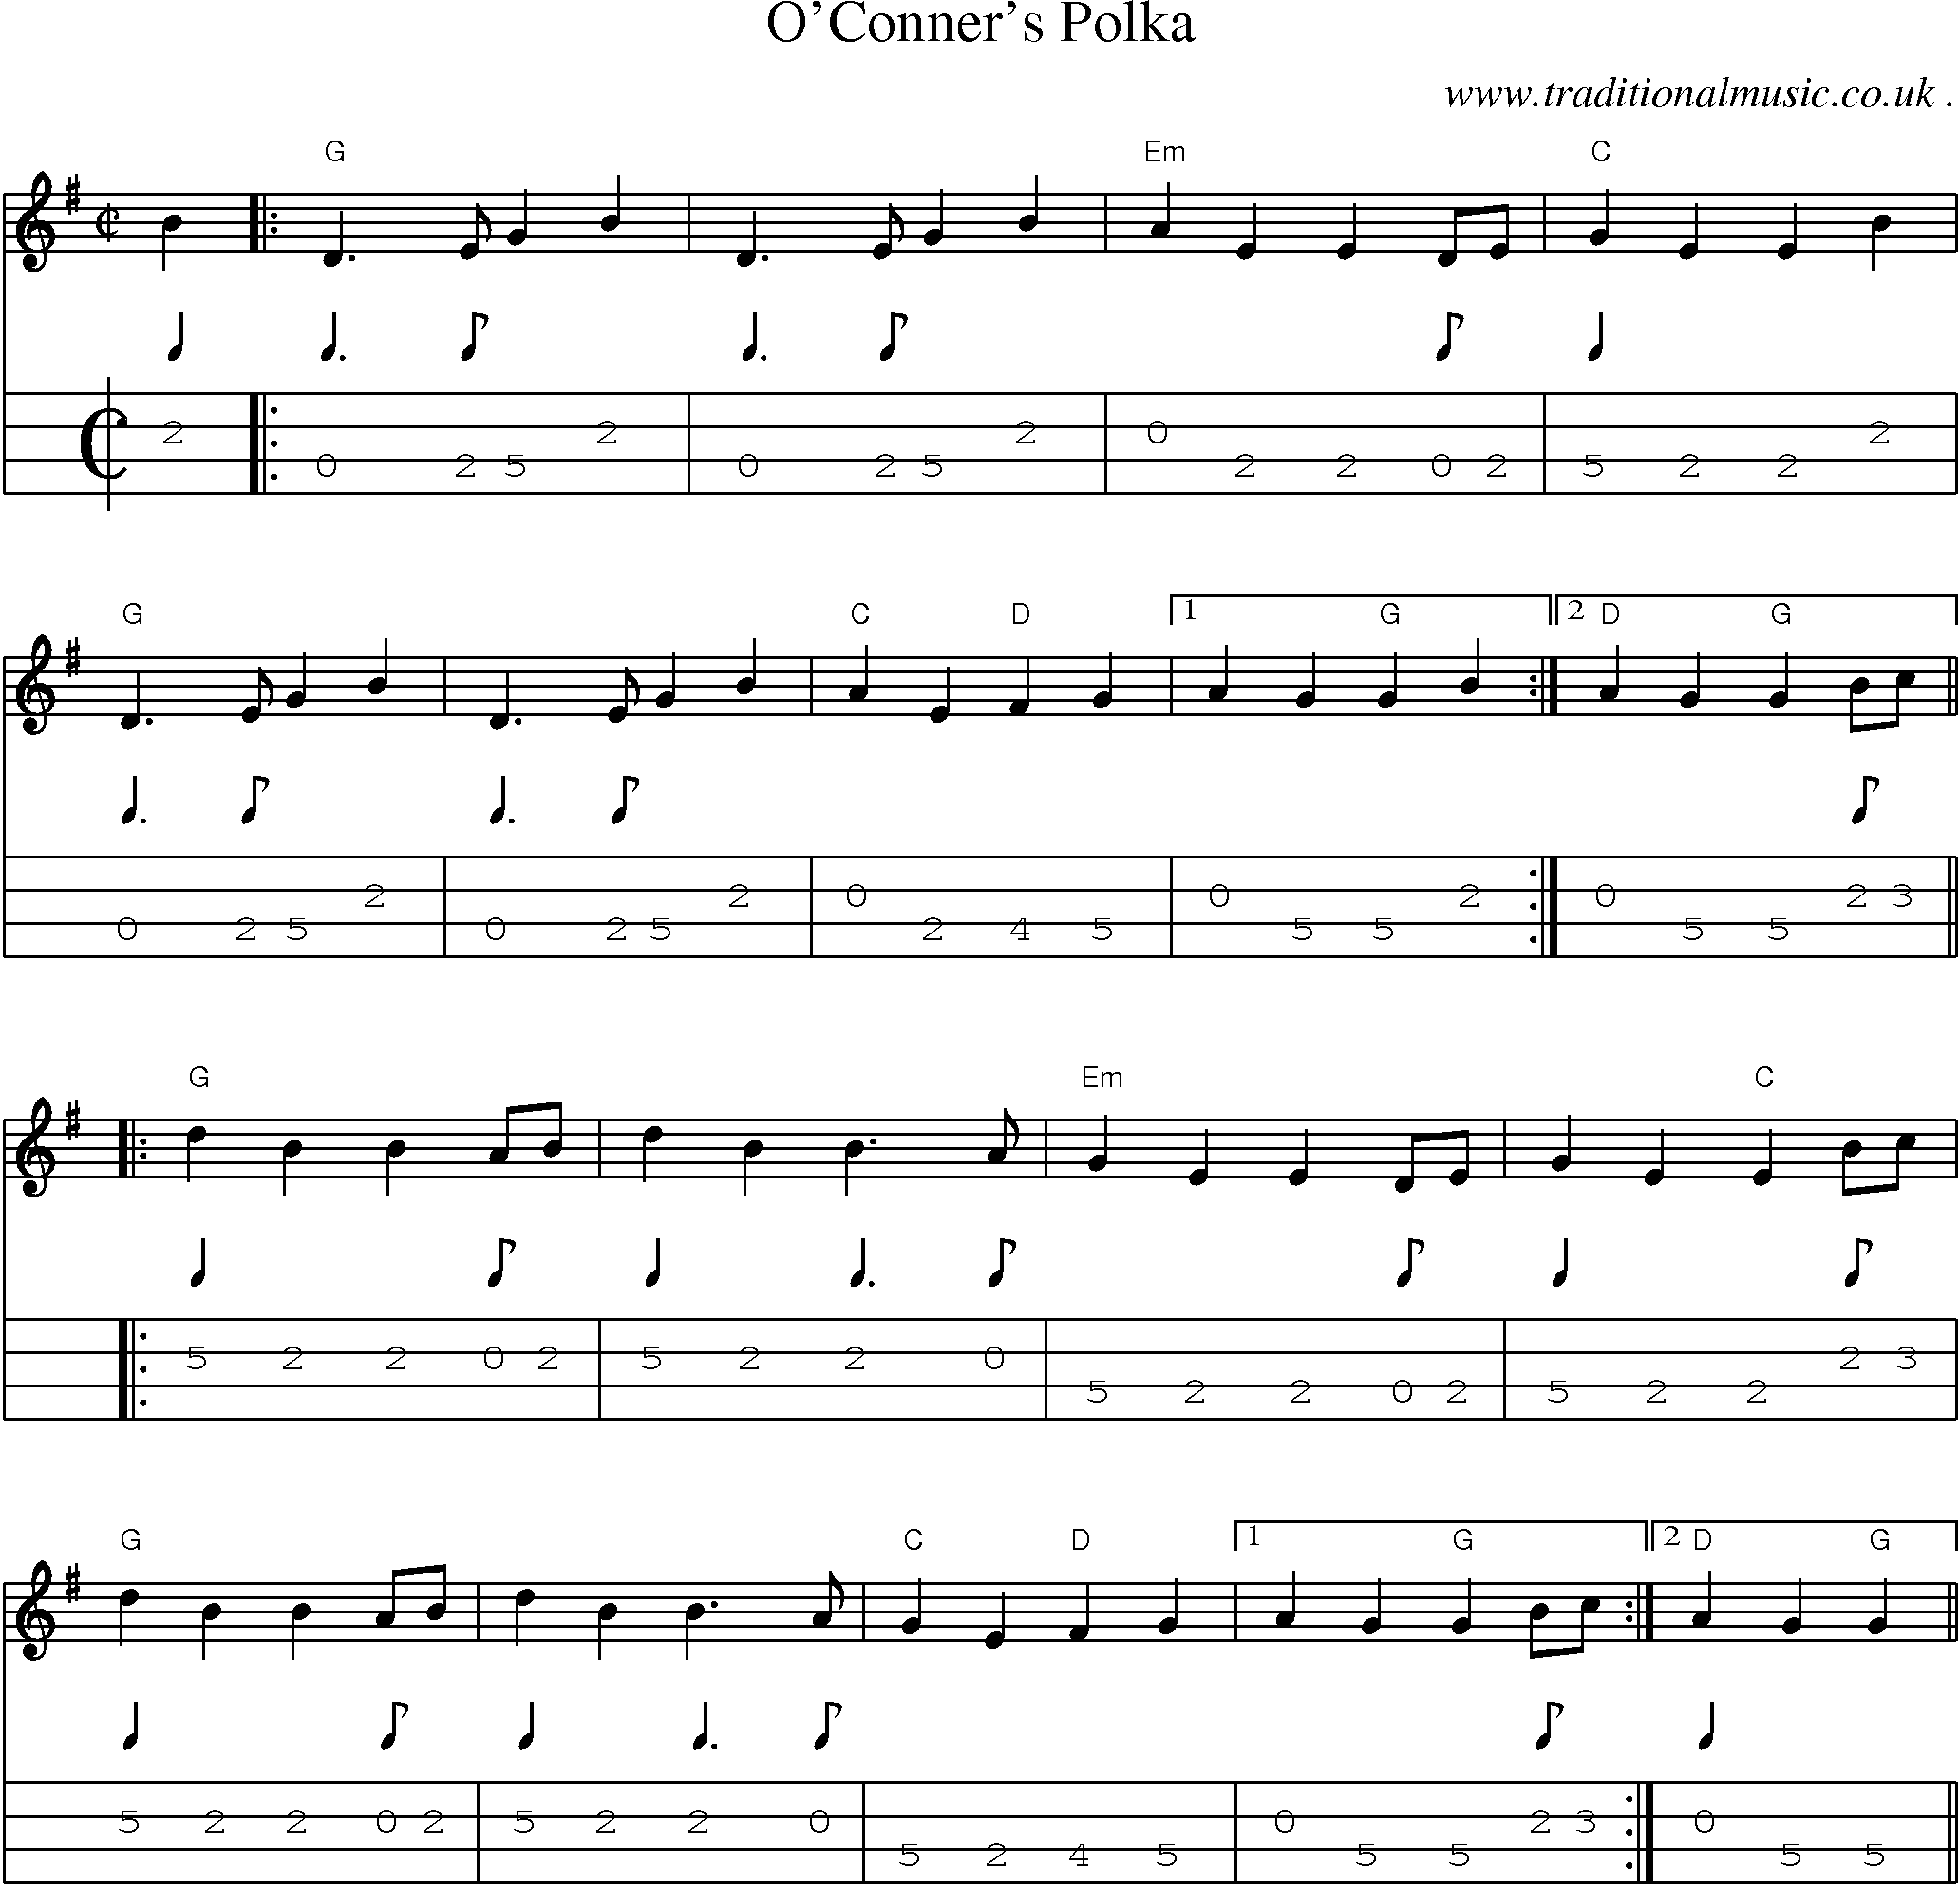 Sheet-music  score, Chords and Mandolin Tabs for Oconners Polka